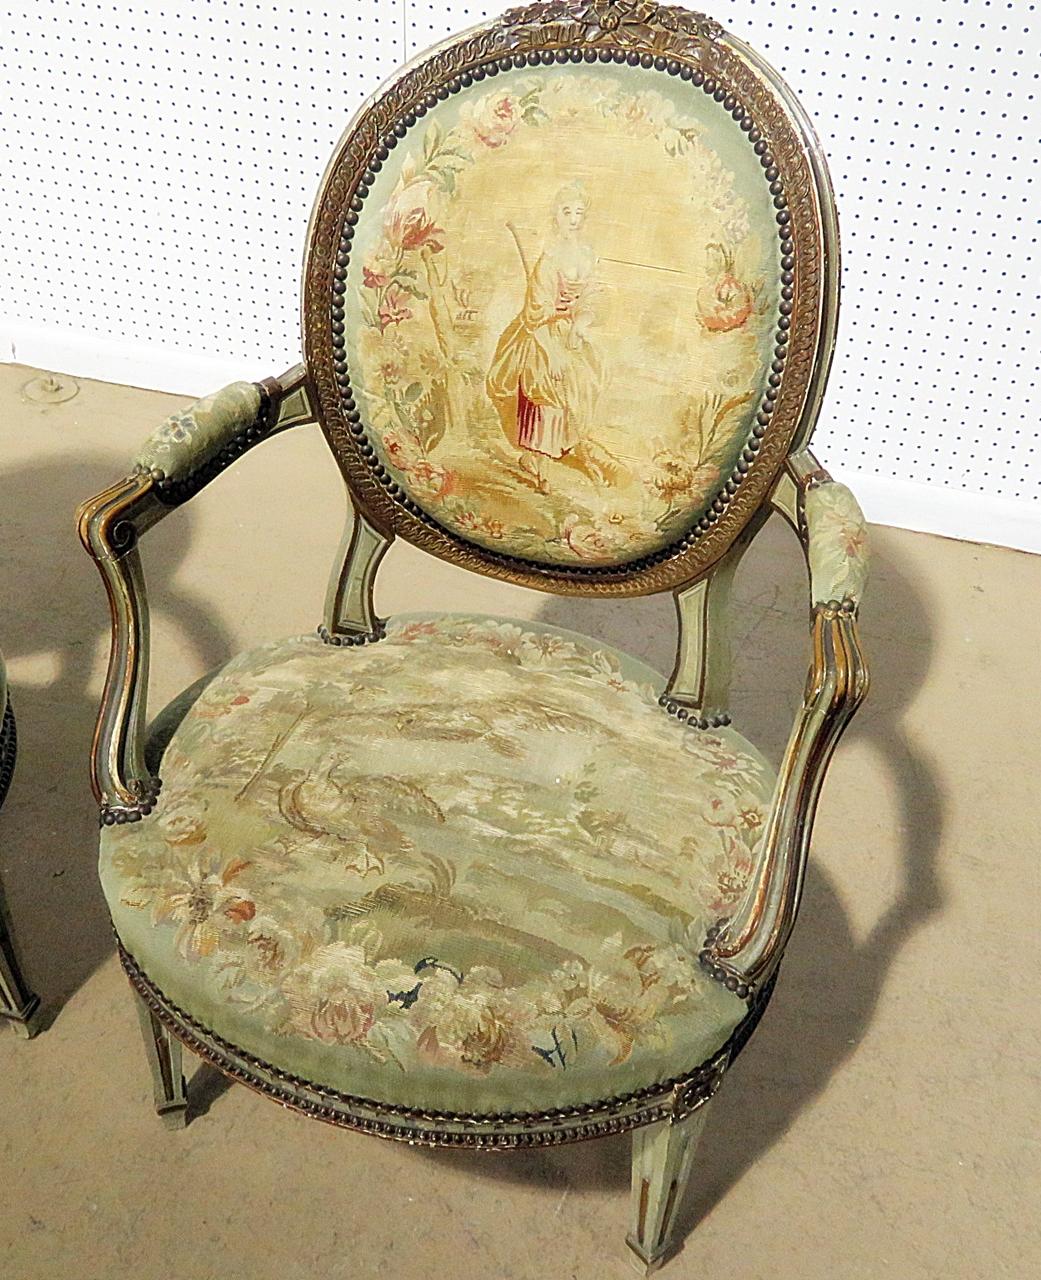 Pair of Louis XIV style fauteuils with needlepoint upholstery and nailhead trim.